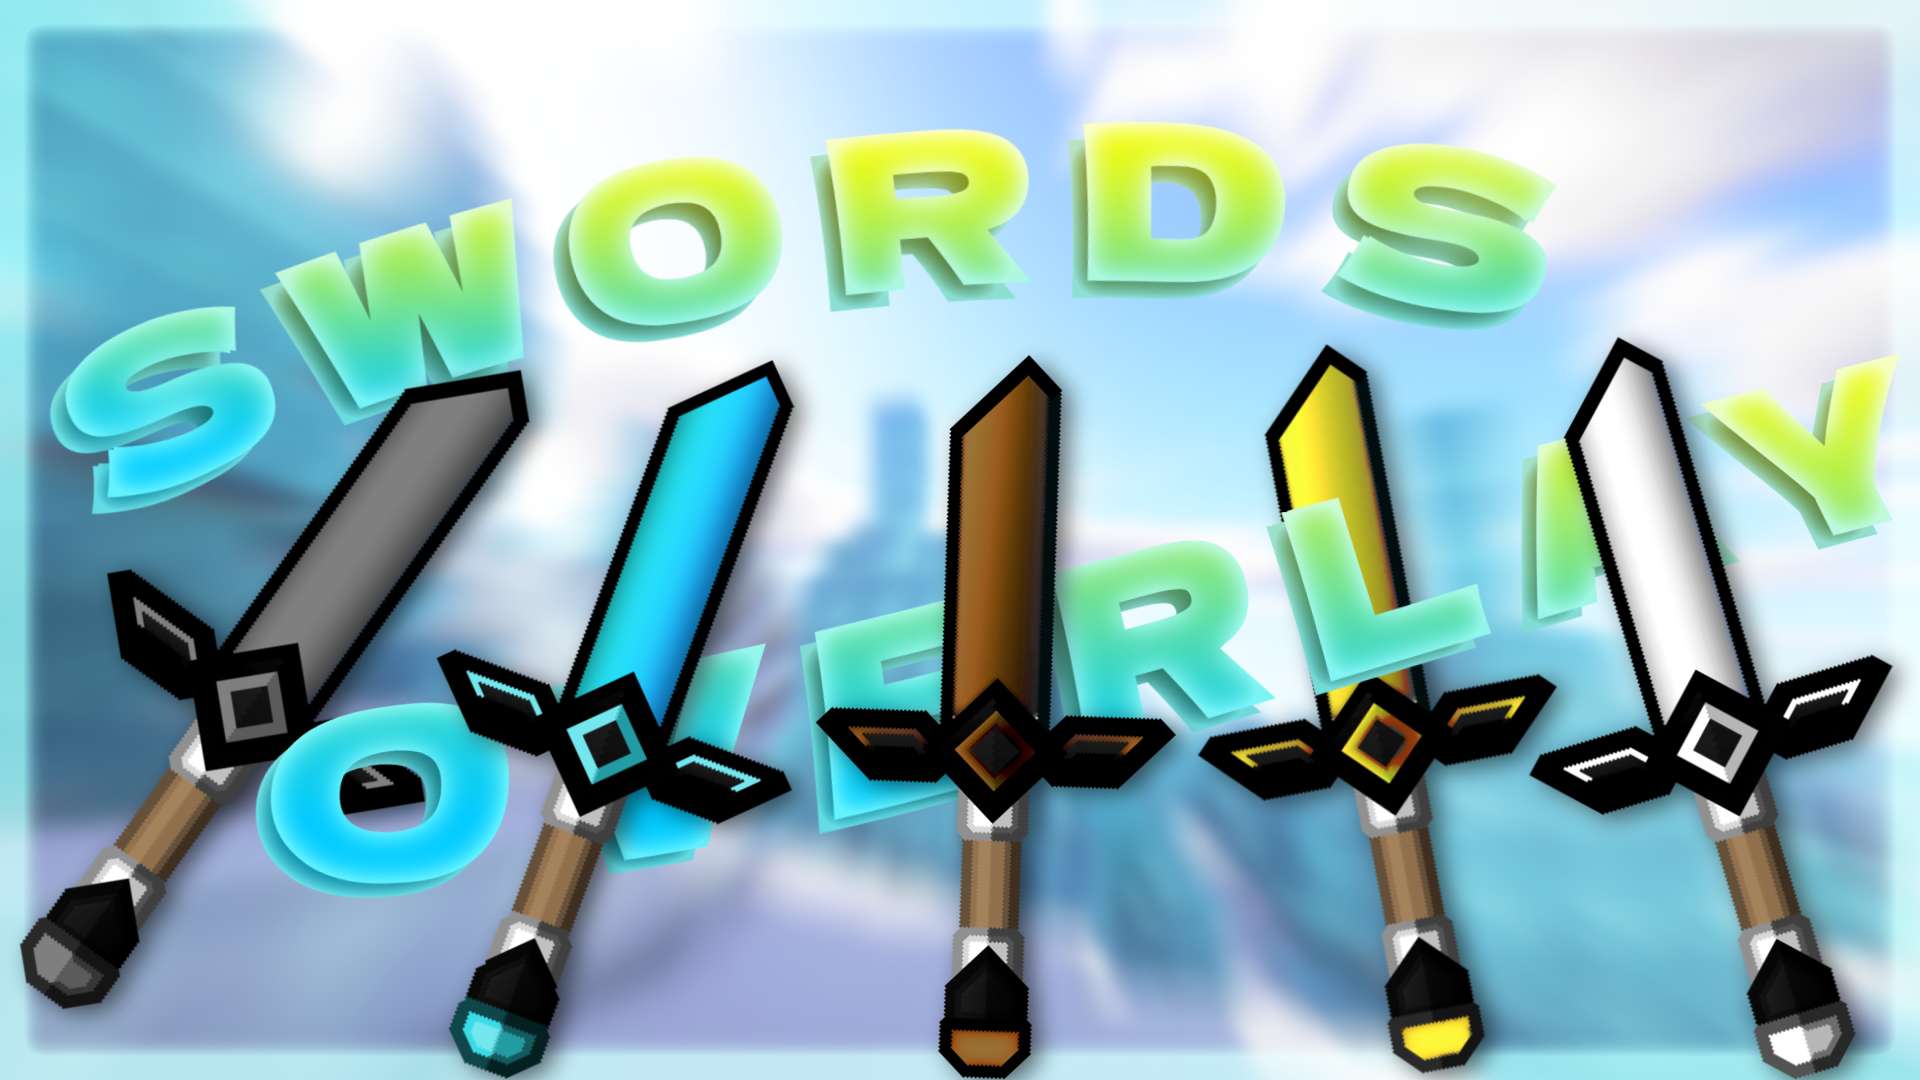 Sword overlay 256x by wickiwacka on PvPRP